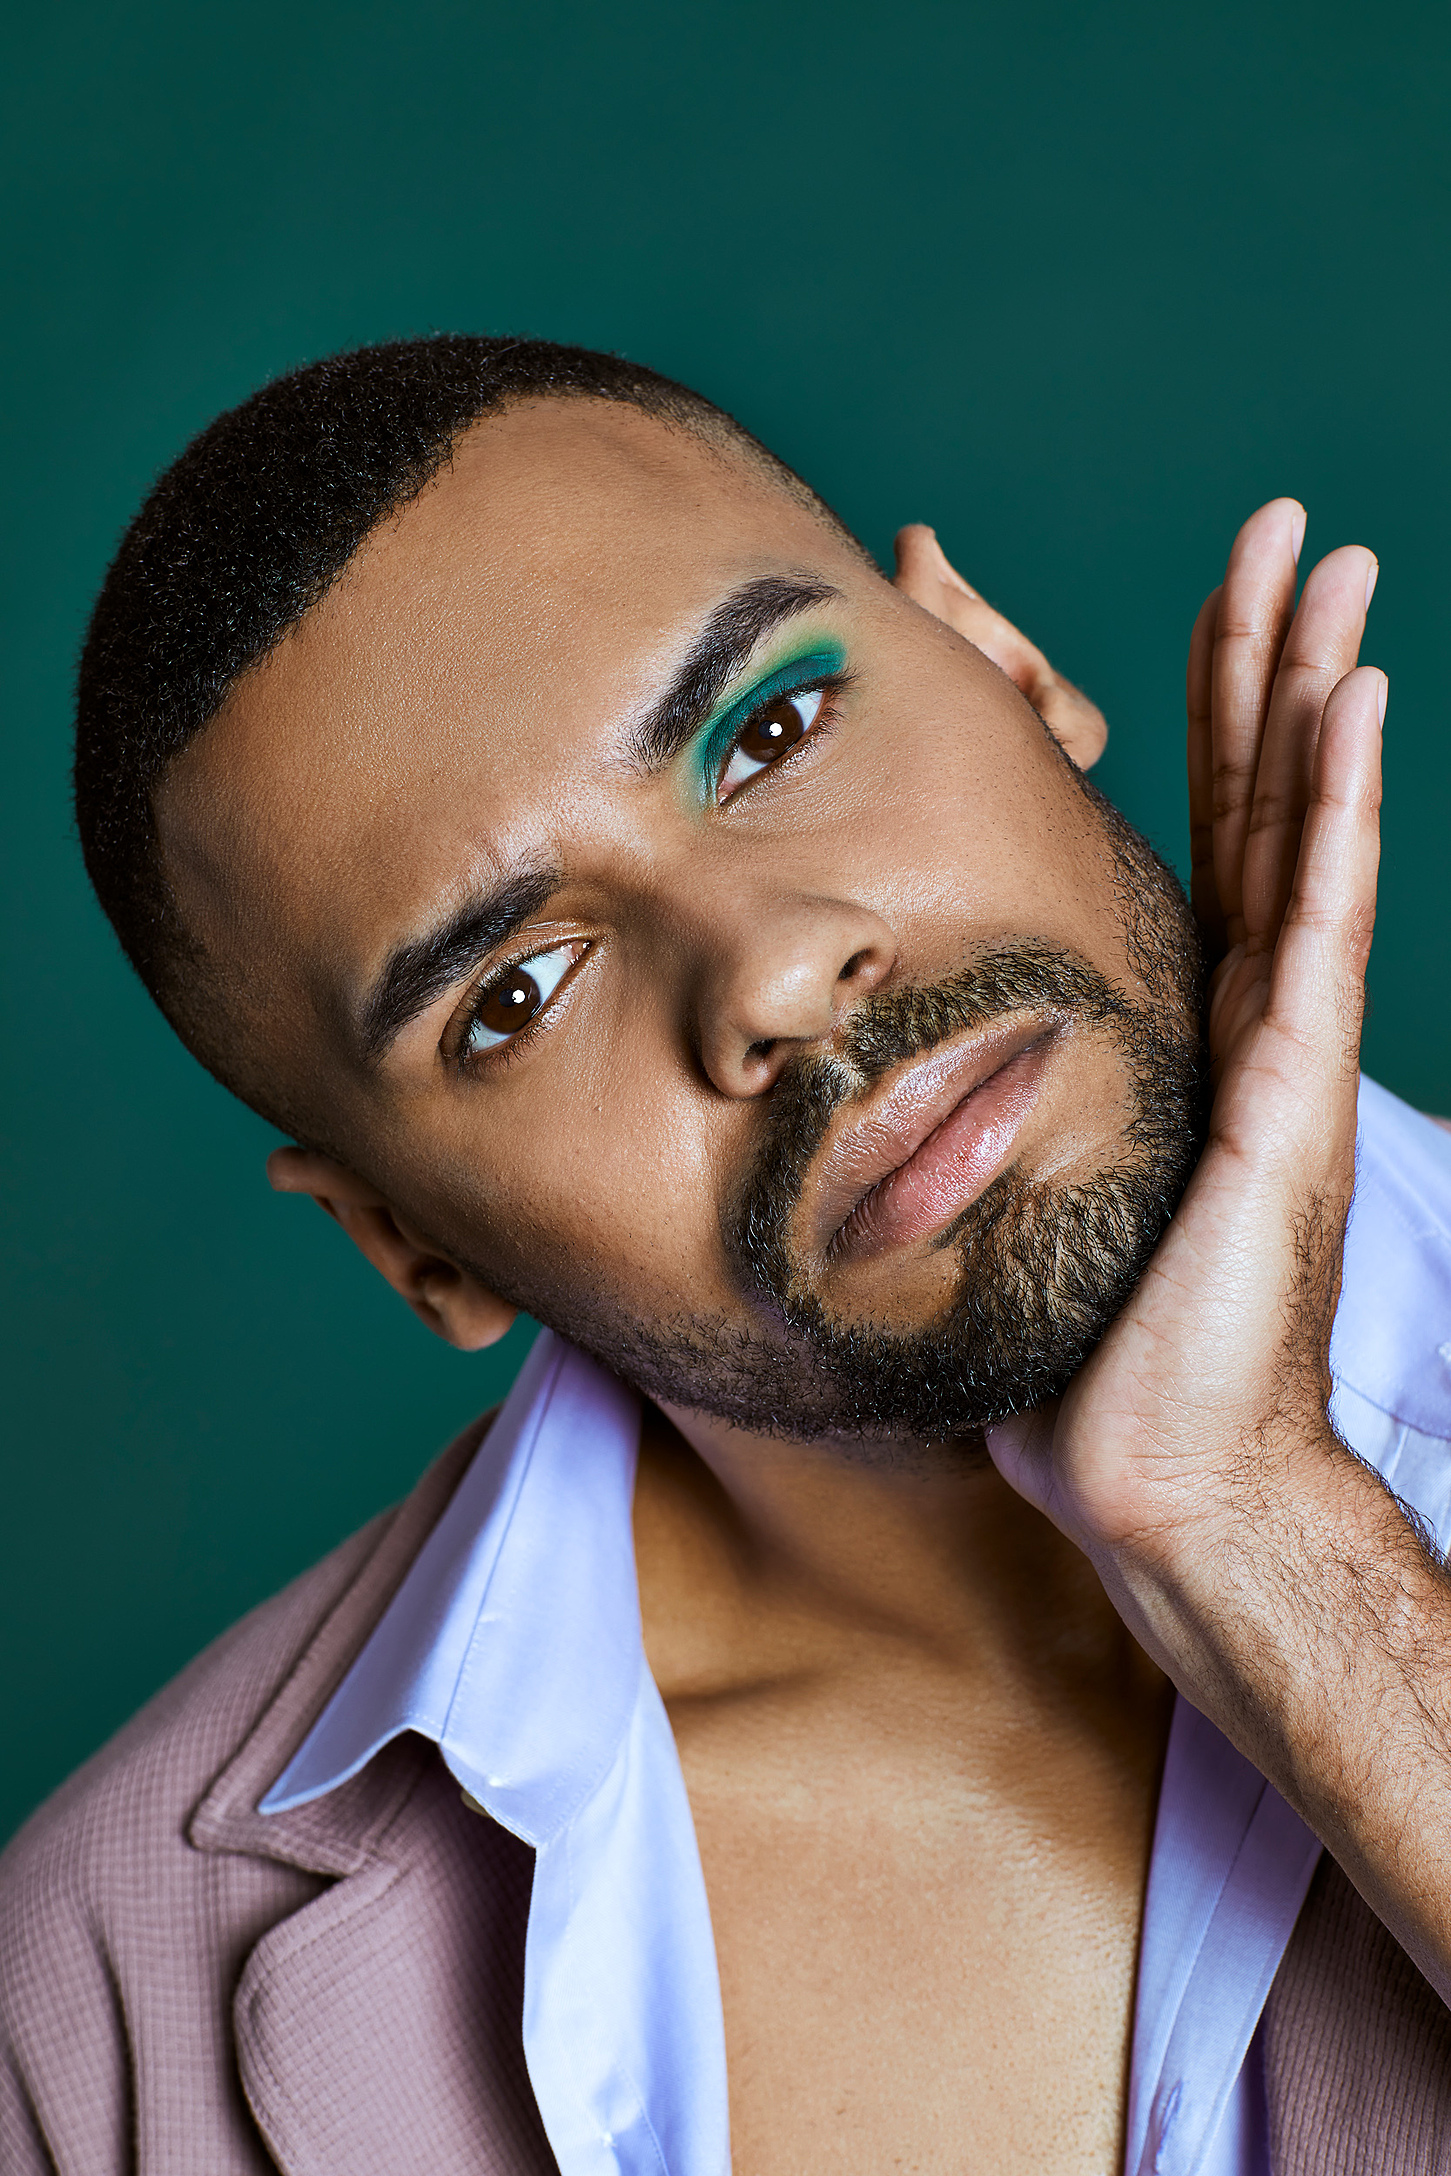 A male model with purple cloths and one green eyeshadow